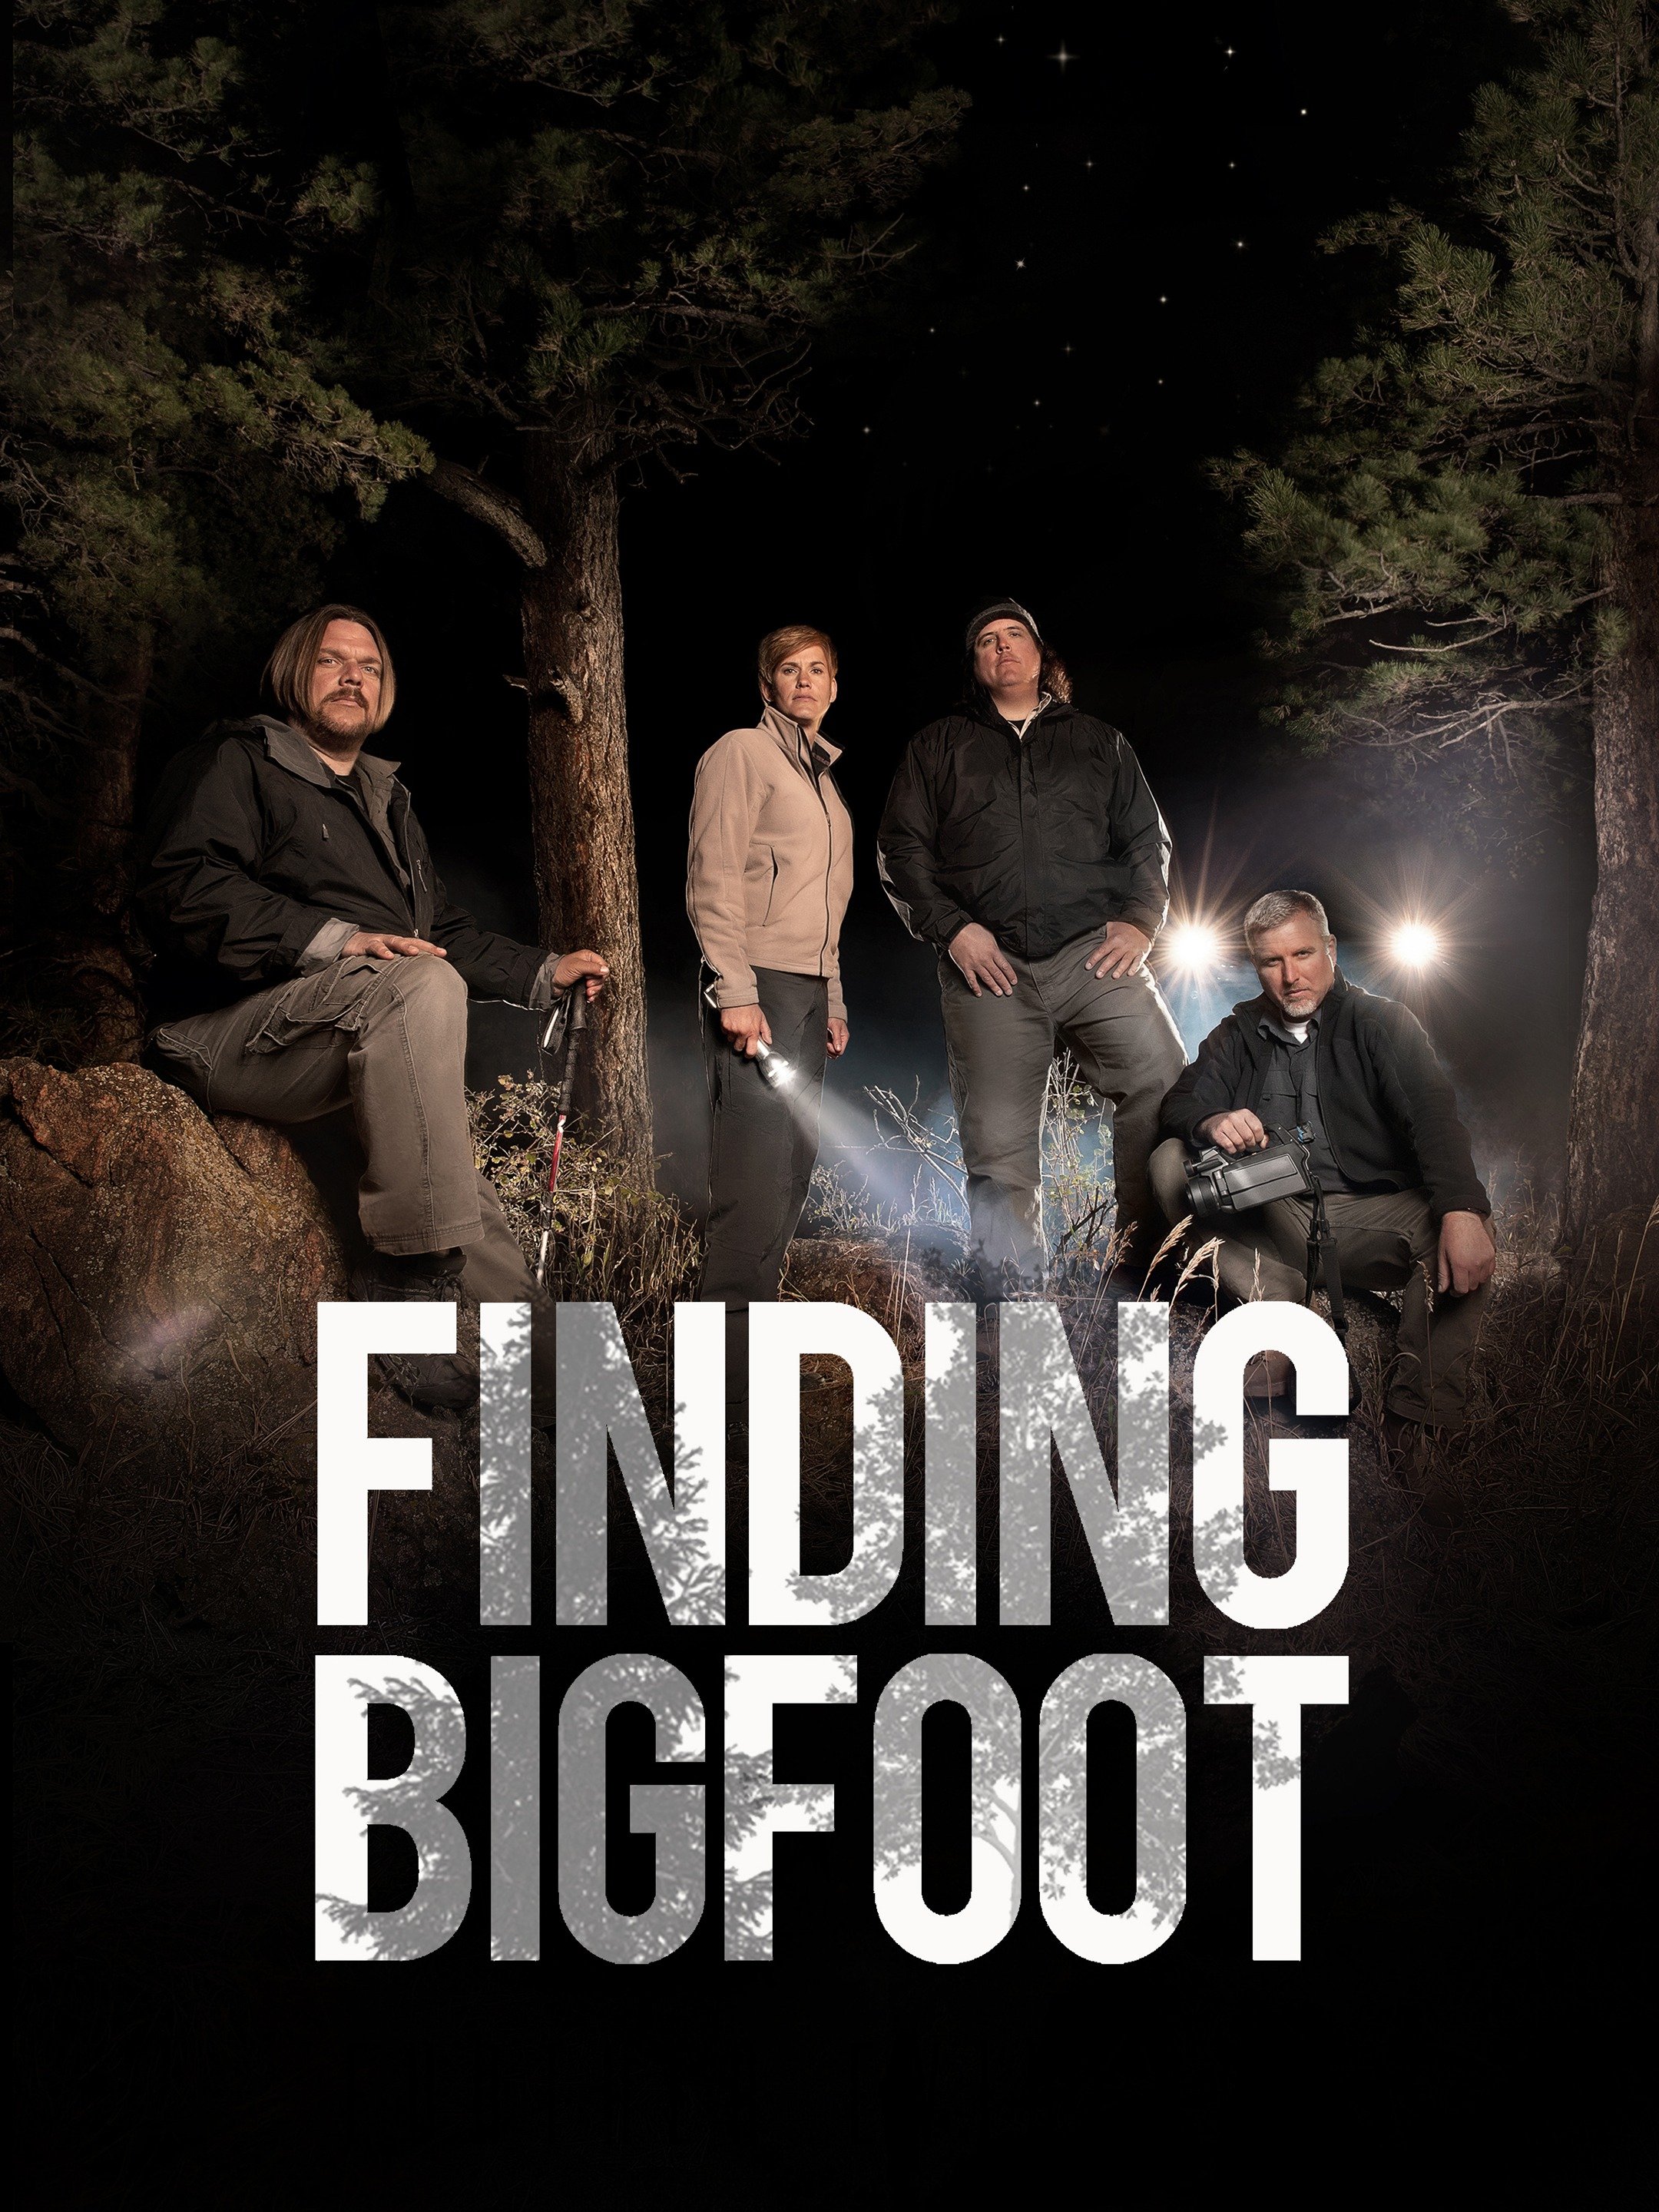 Finding Bigfoot Season 2 Pictures Rotten Tomatoes